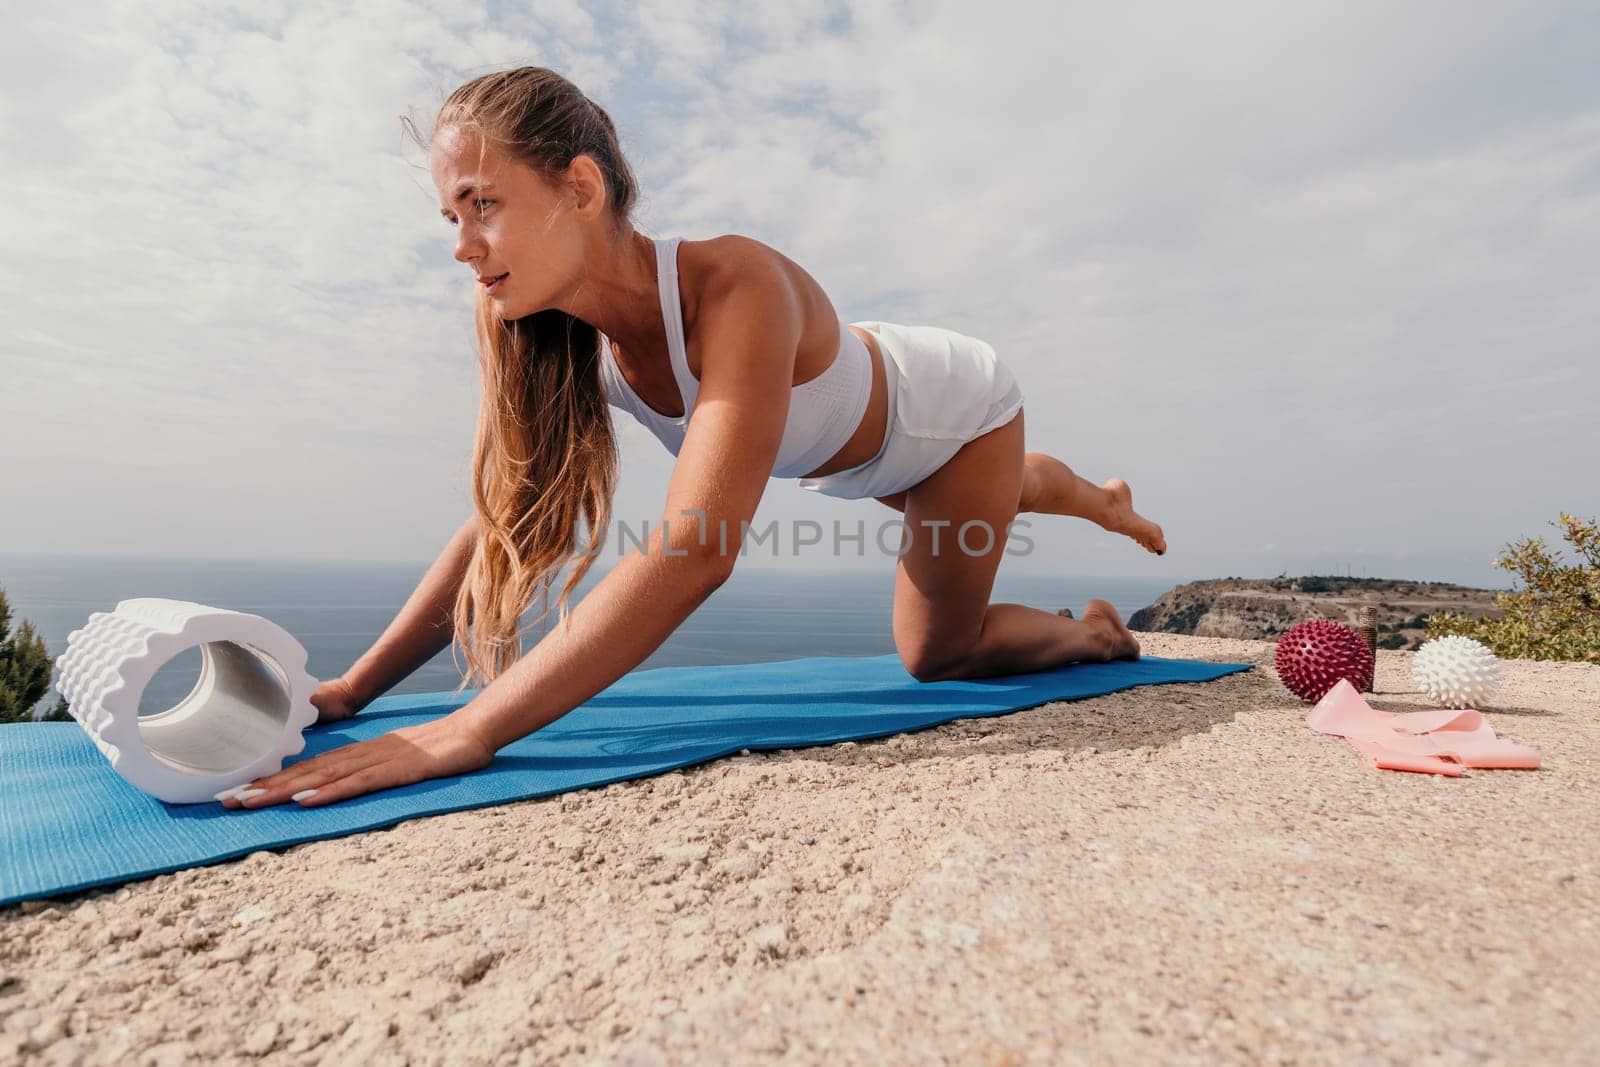 Woman sea pilates. Sporty, middle-aged woman practicing pilates in park near the sea. trains on a yoga mat and exudes a happy and active demeanor, promoting the idea of a healthy lifestyle through exercise and meditation.